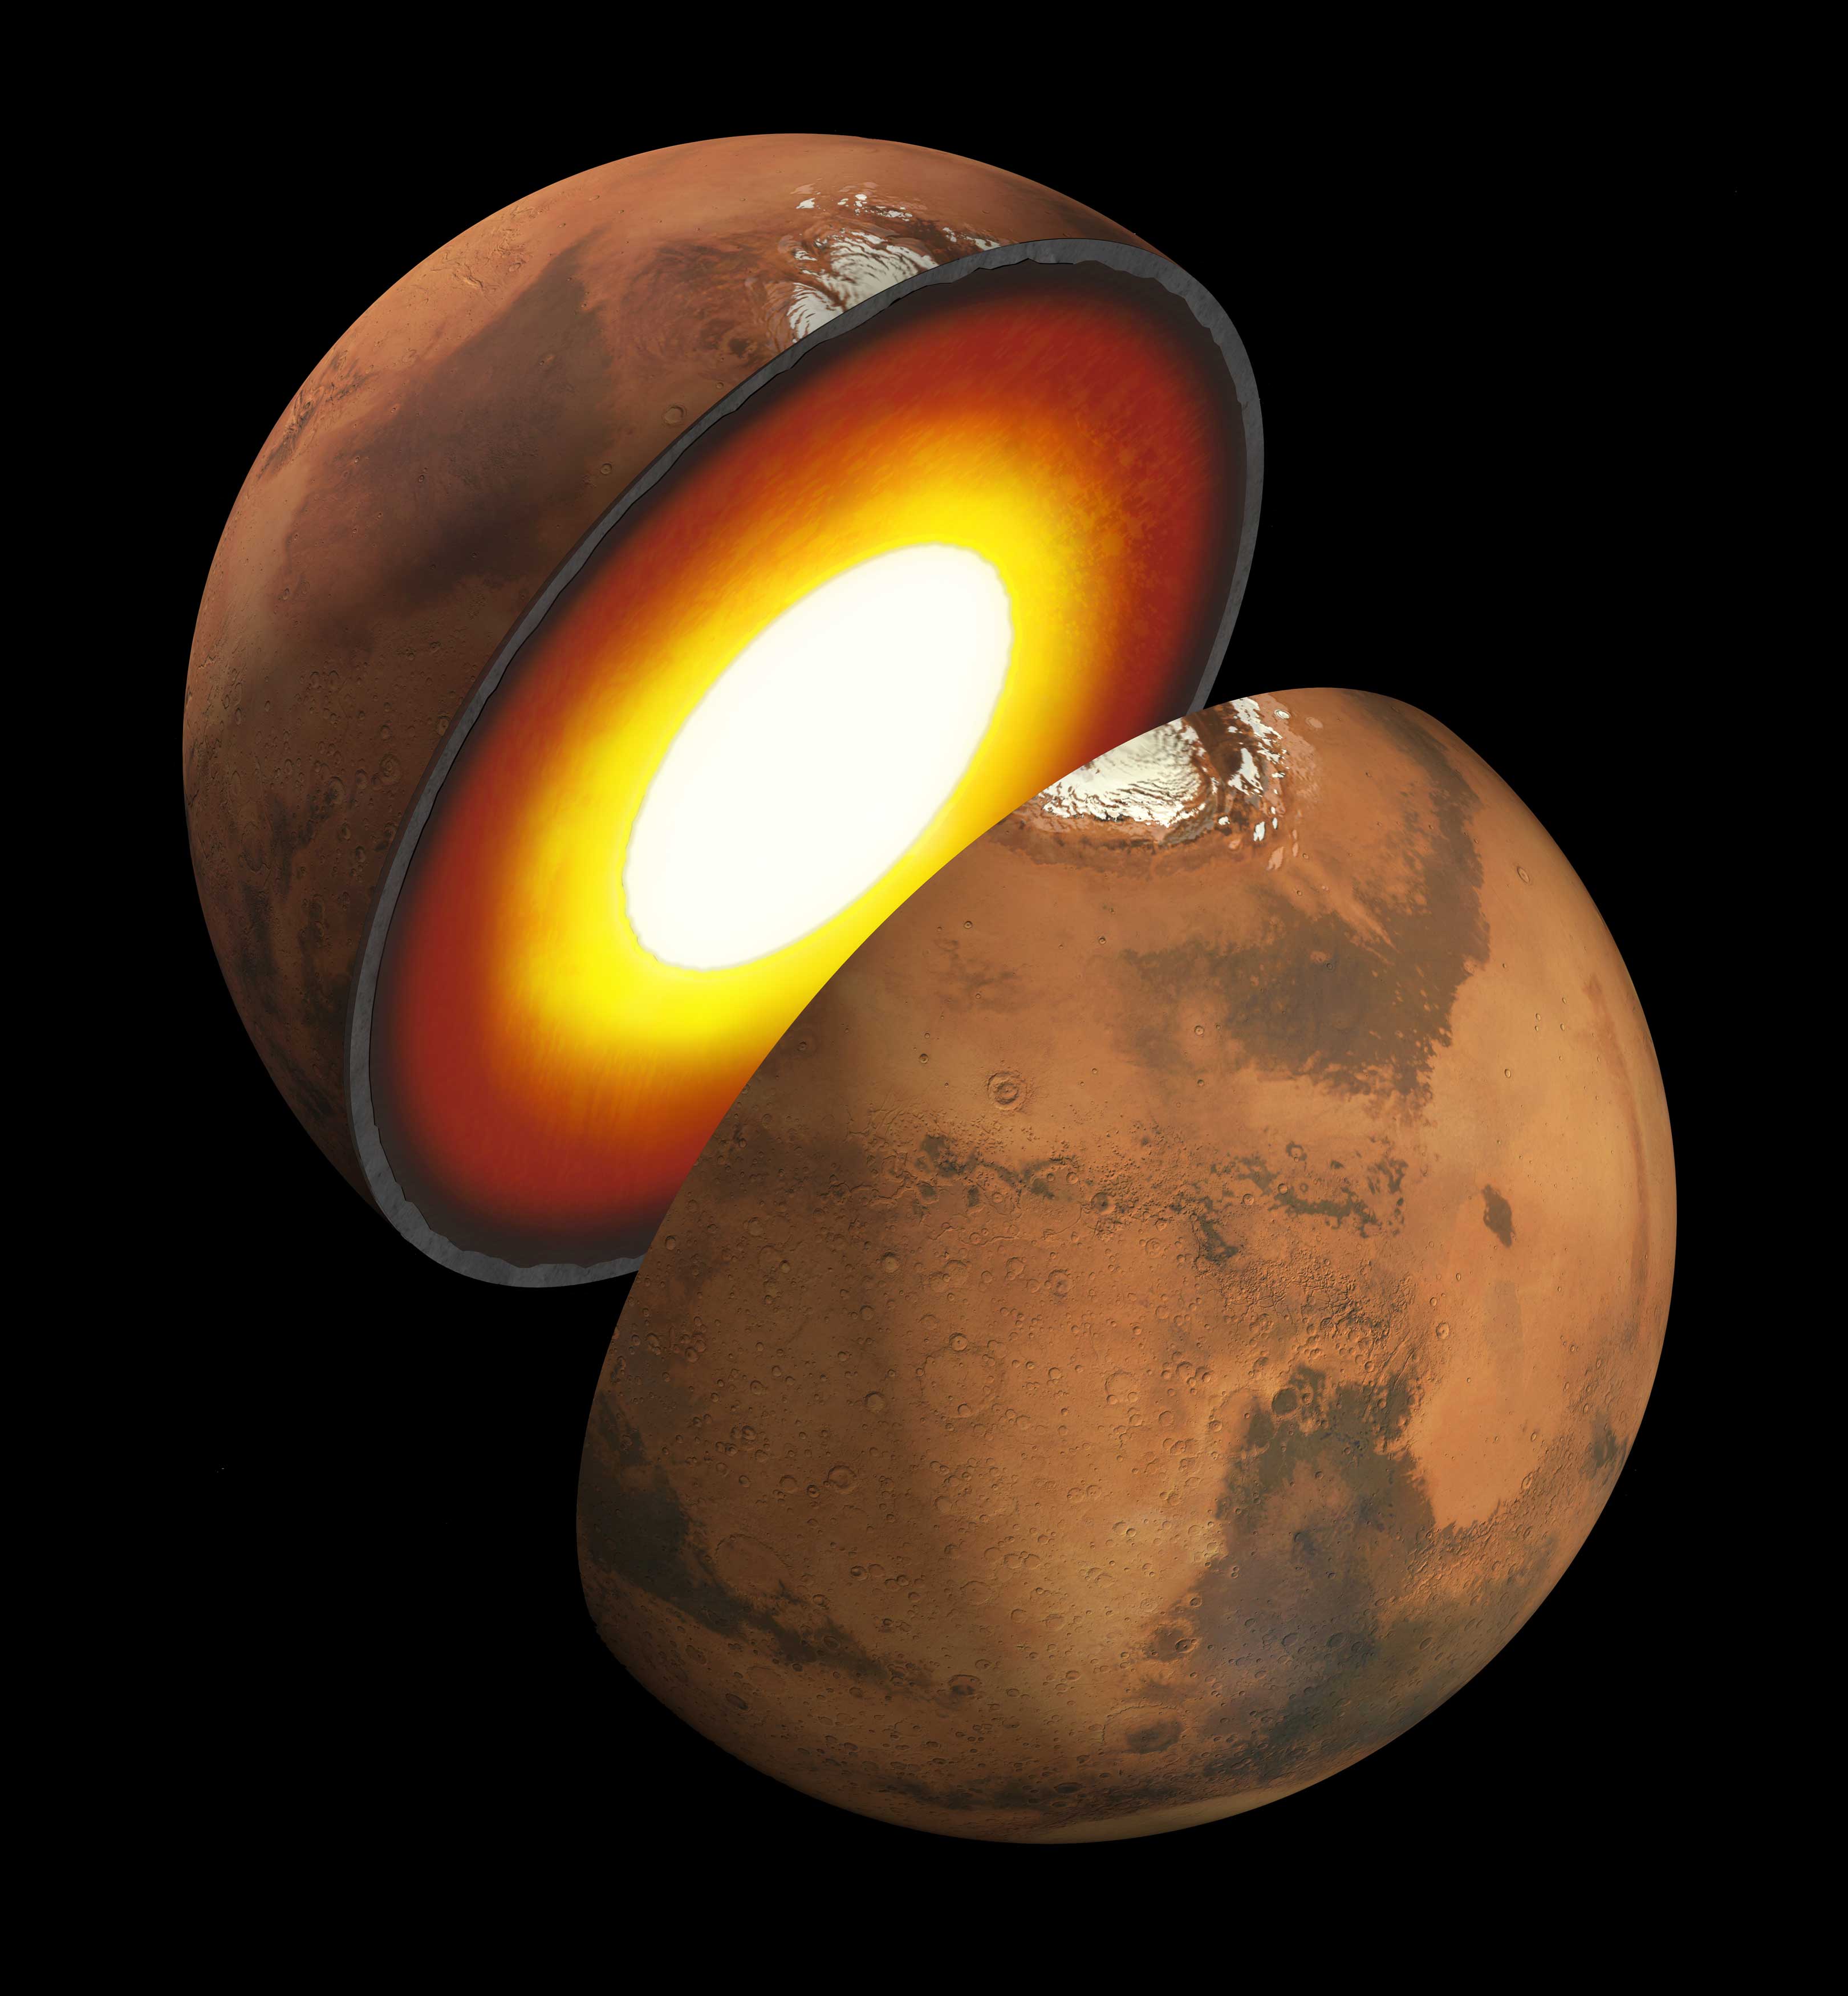 Artist’s rendition showing the inner structure of Mars. The topmost layer is known as the crust, underneath it is the mantle, which rests on a solid inner core.